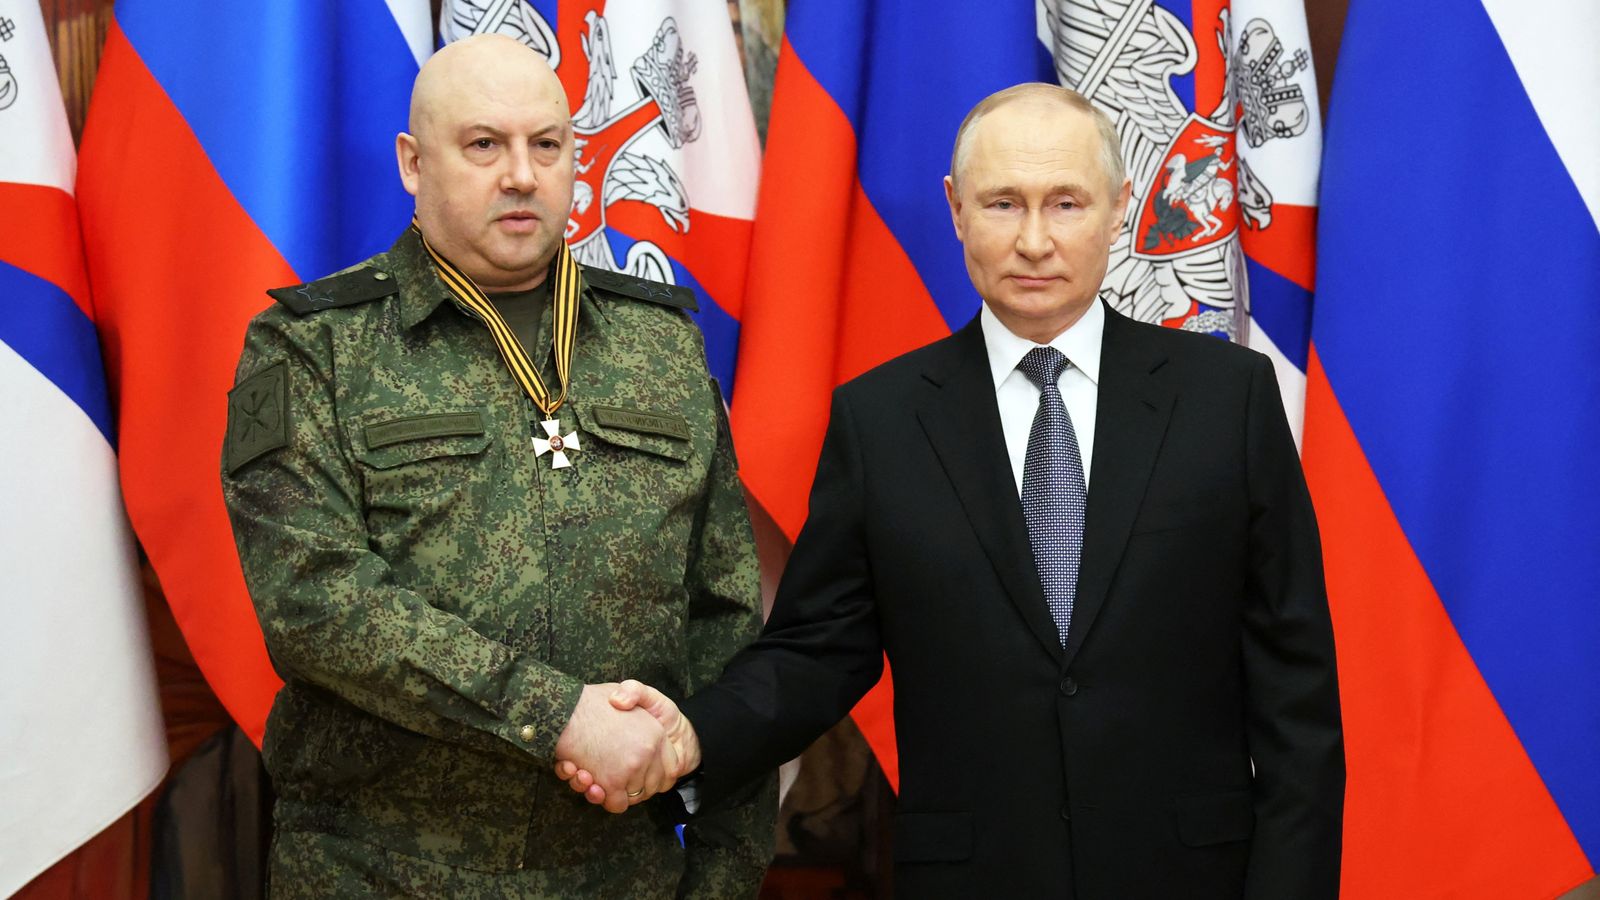 'General Armageddon': Russia replaces commander of Ukraine war after three months in job